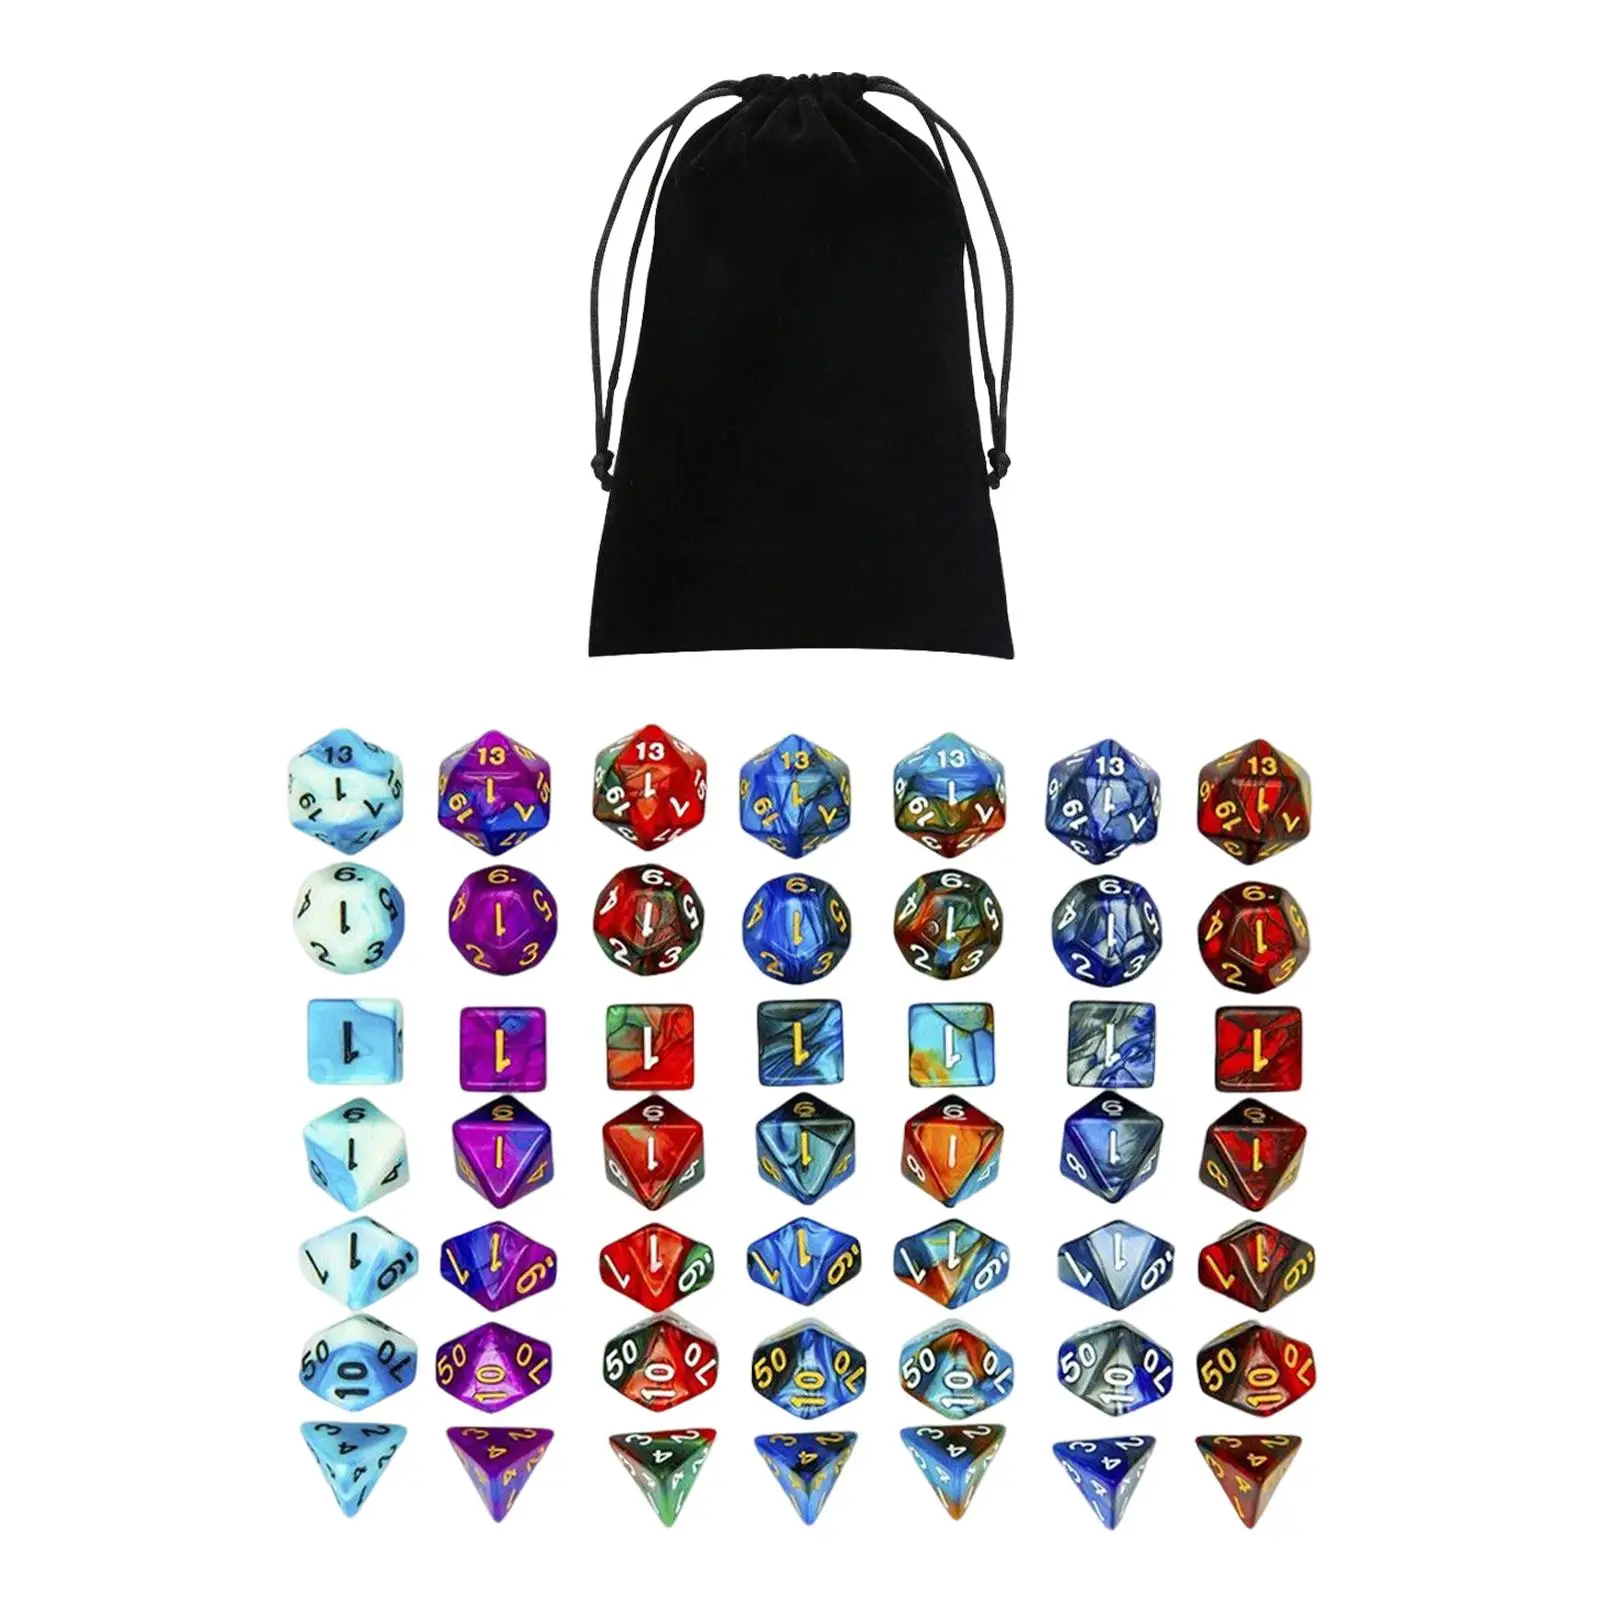 49 Polyhedral Dices Set Party Toys with Pouch for DND Role playing, math Teaching